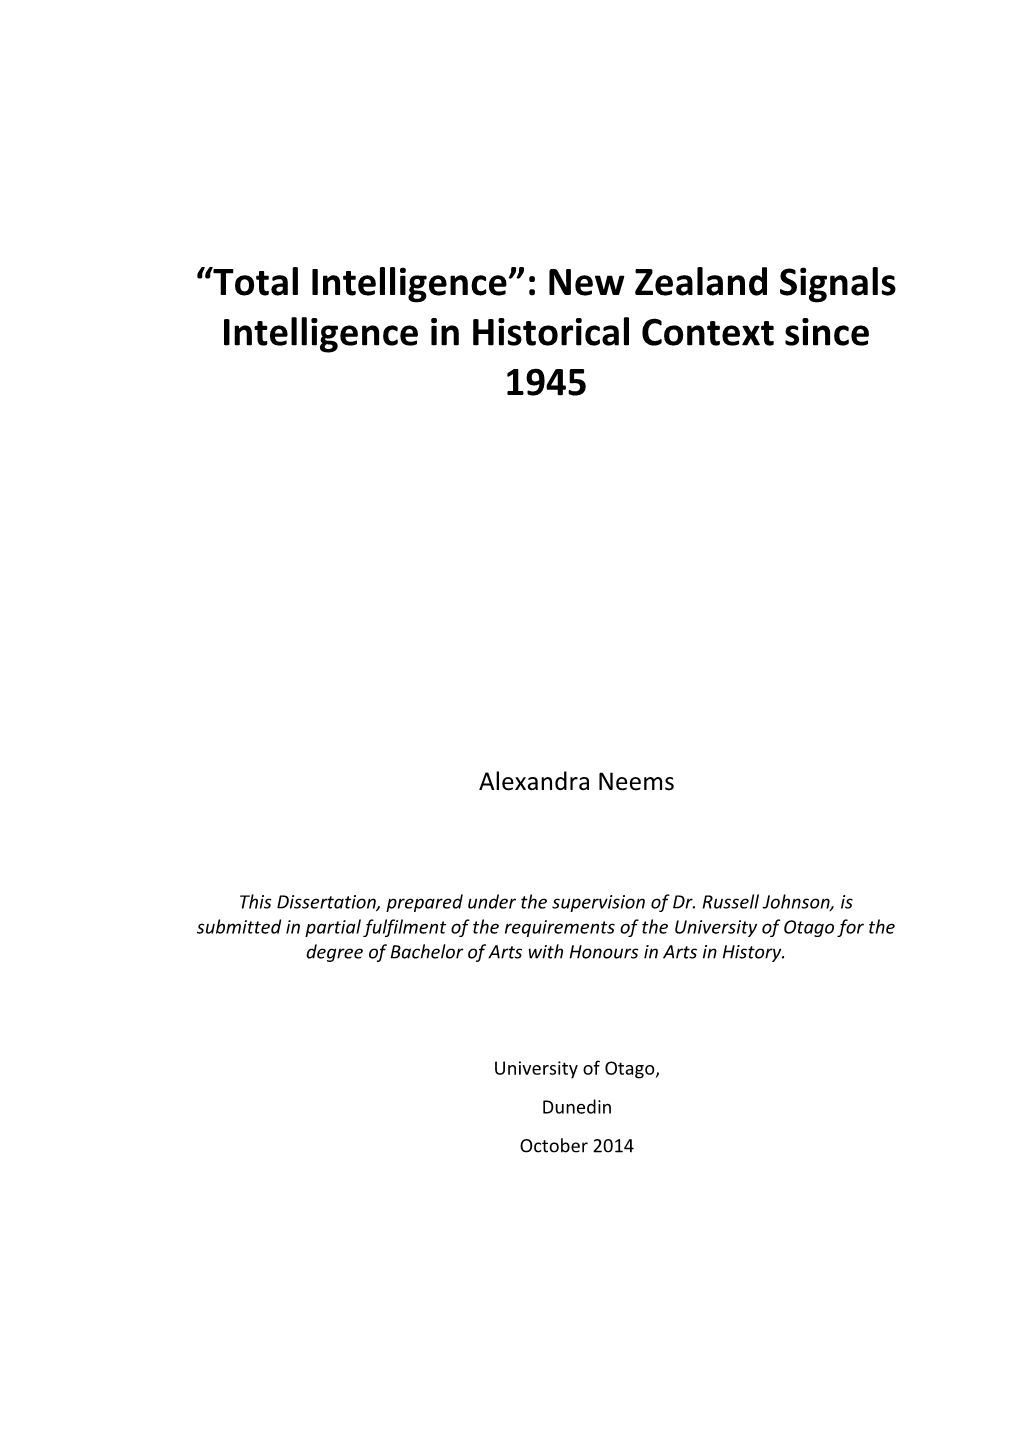 New Zealand Signals Intelligence in Historical Context Since 1945